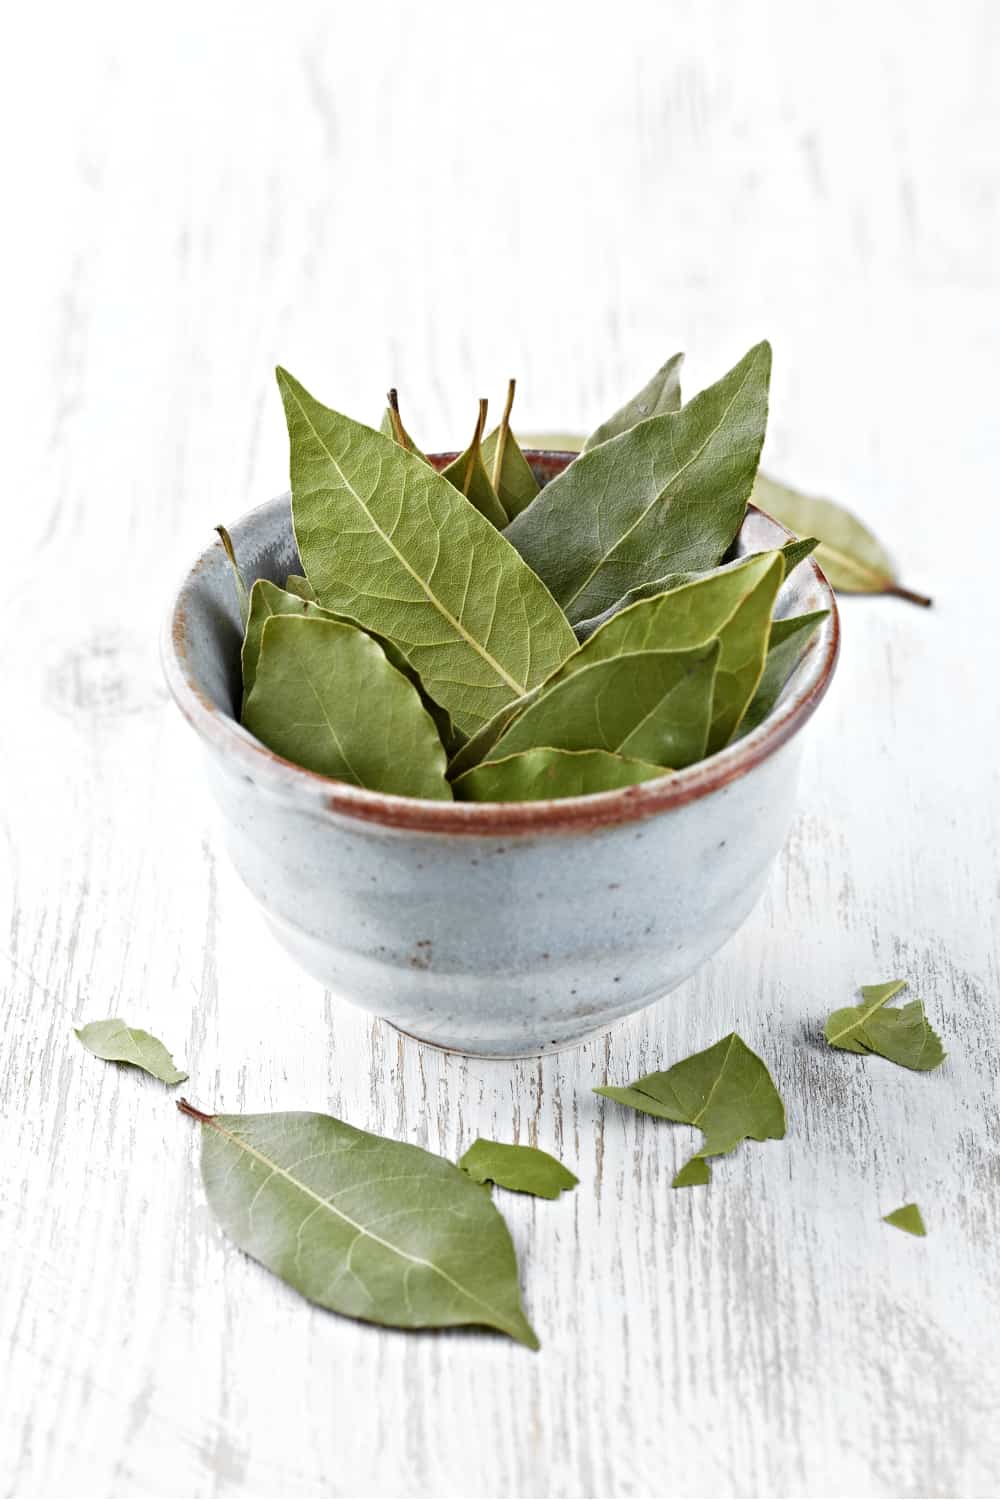 bay leaves in a dish